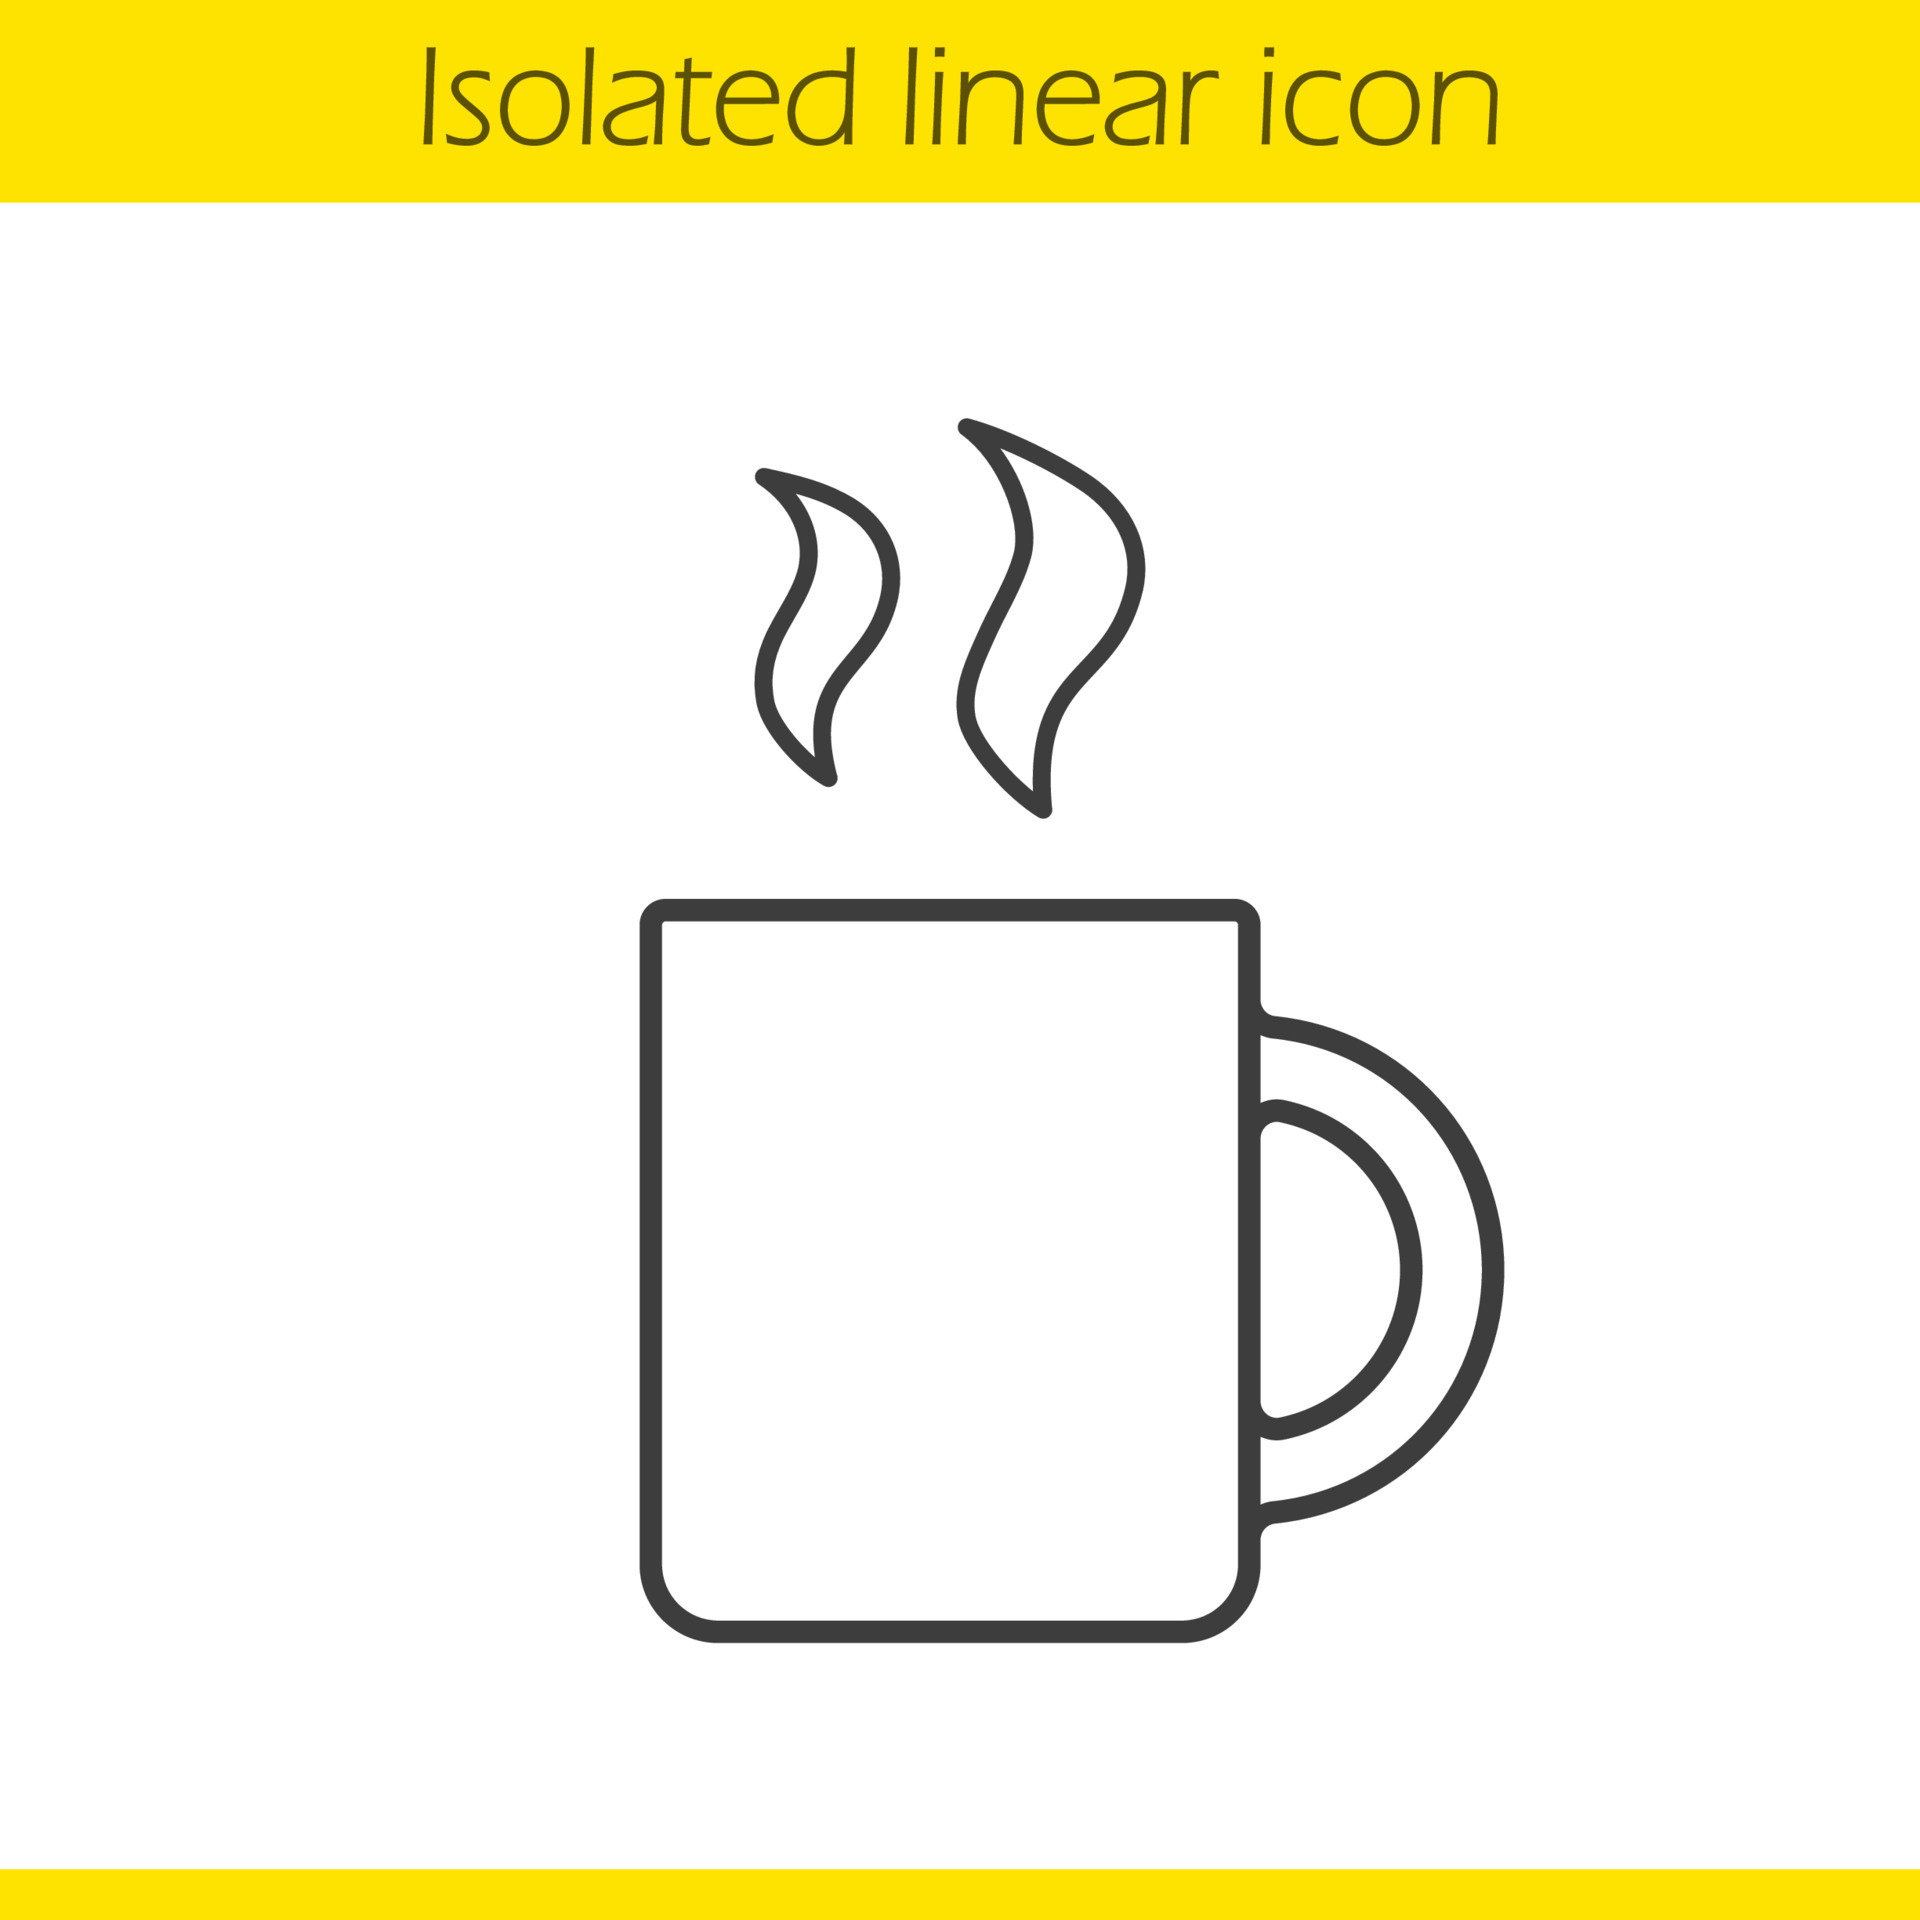 Cup and glass slow high shape line contour set Vector Image